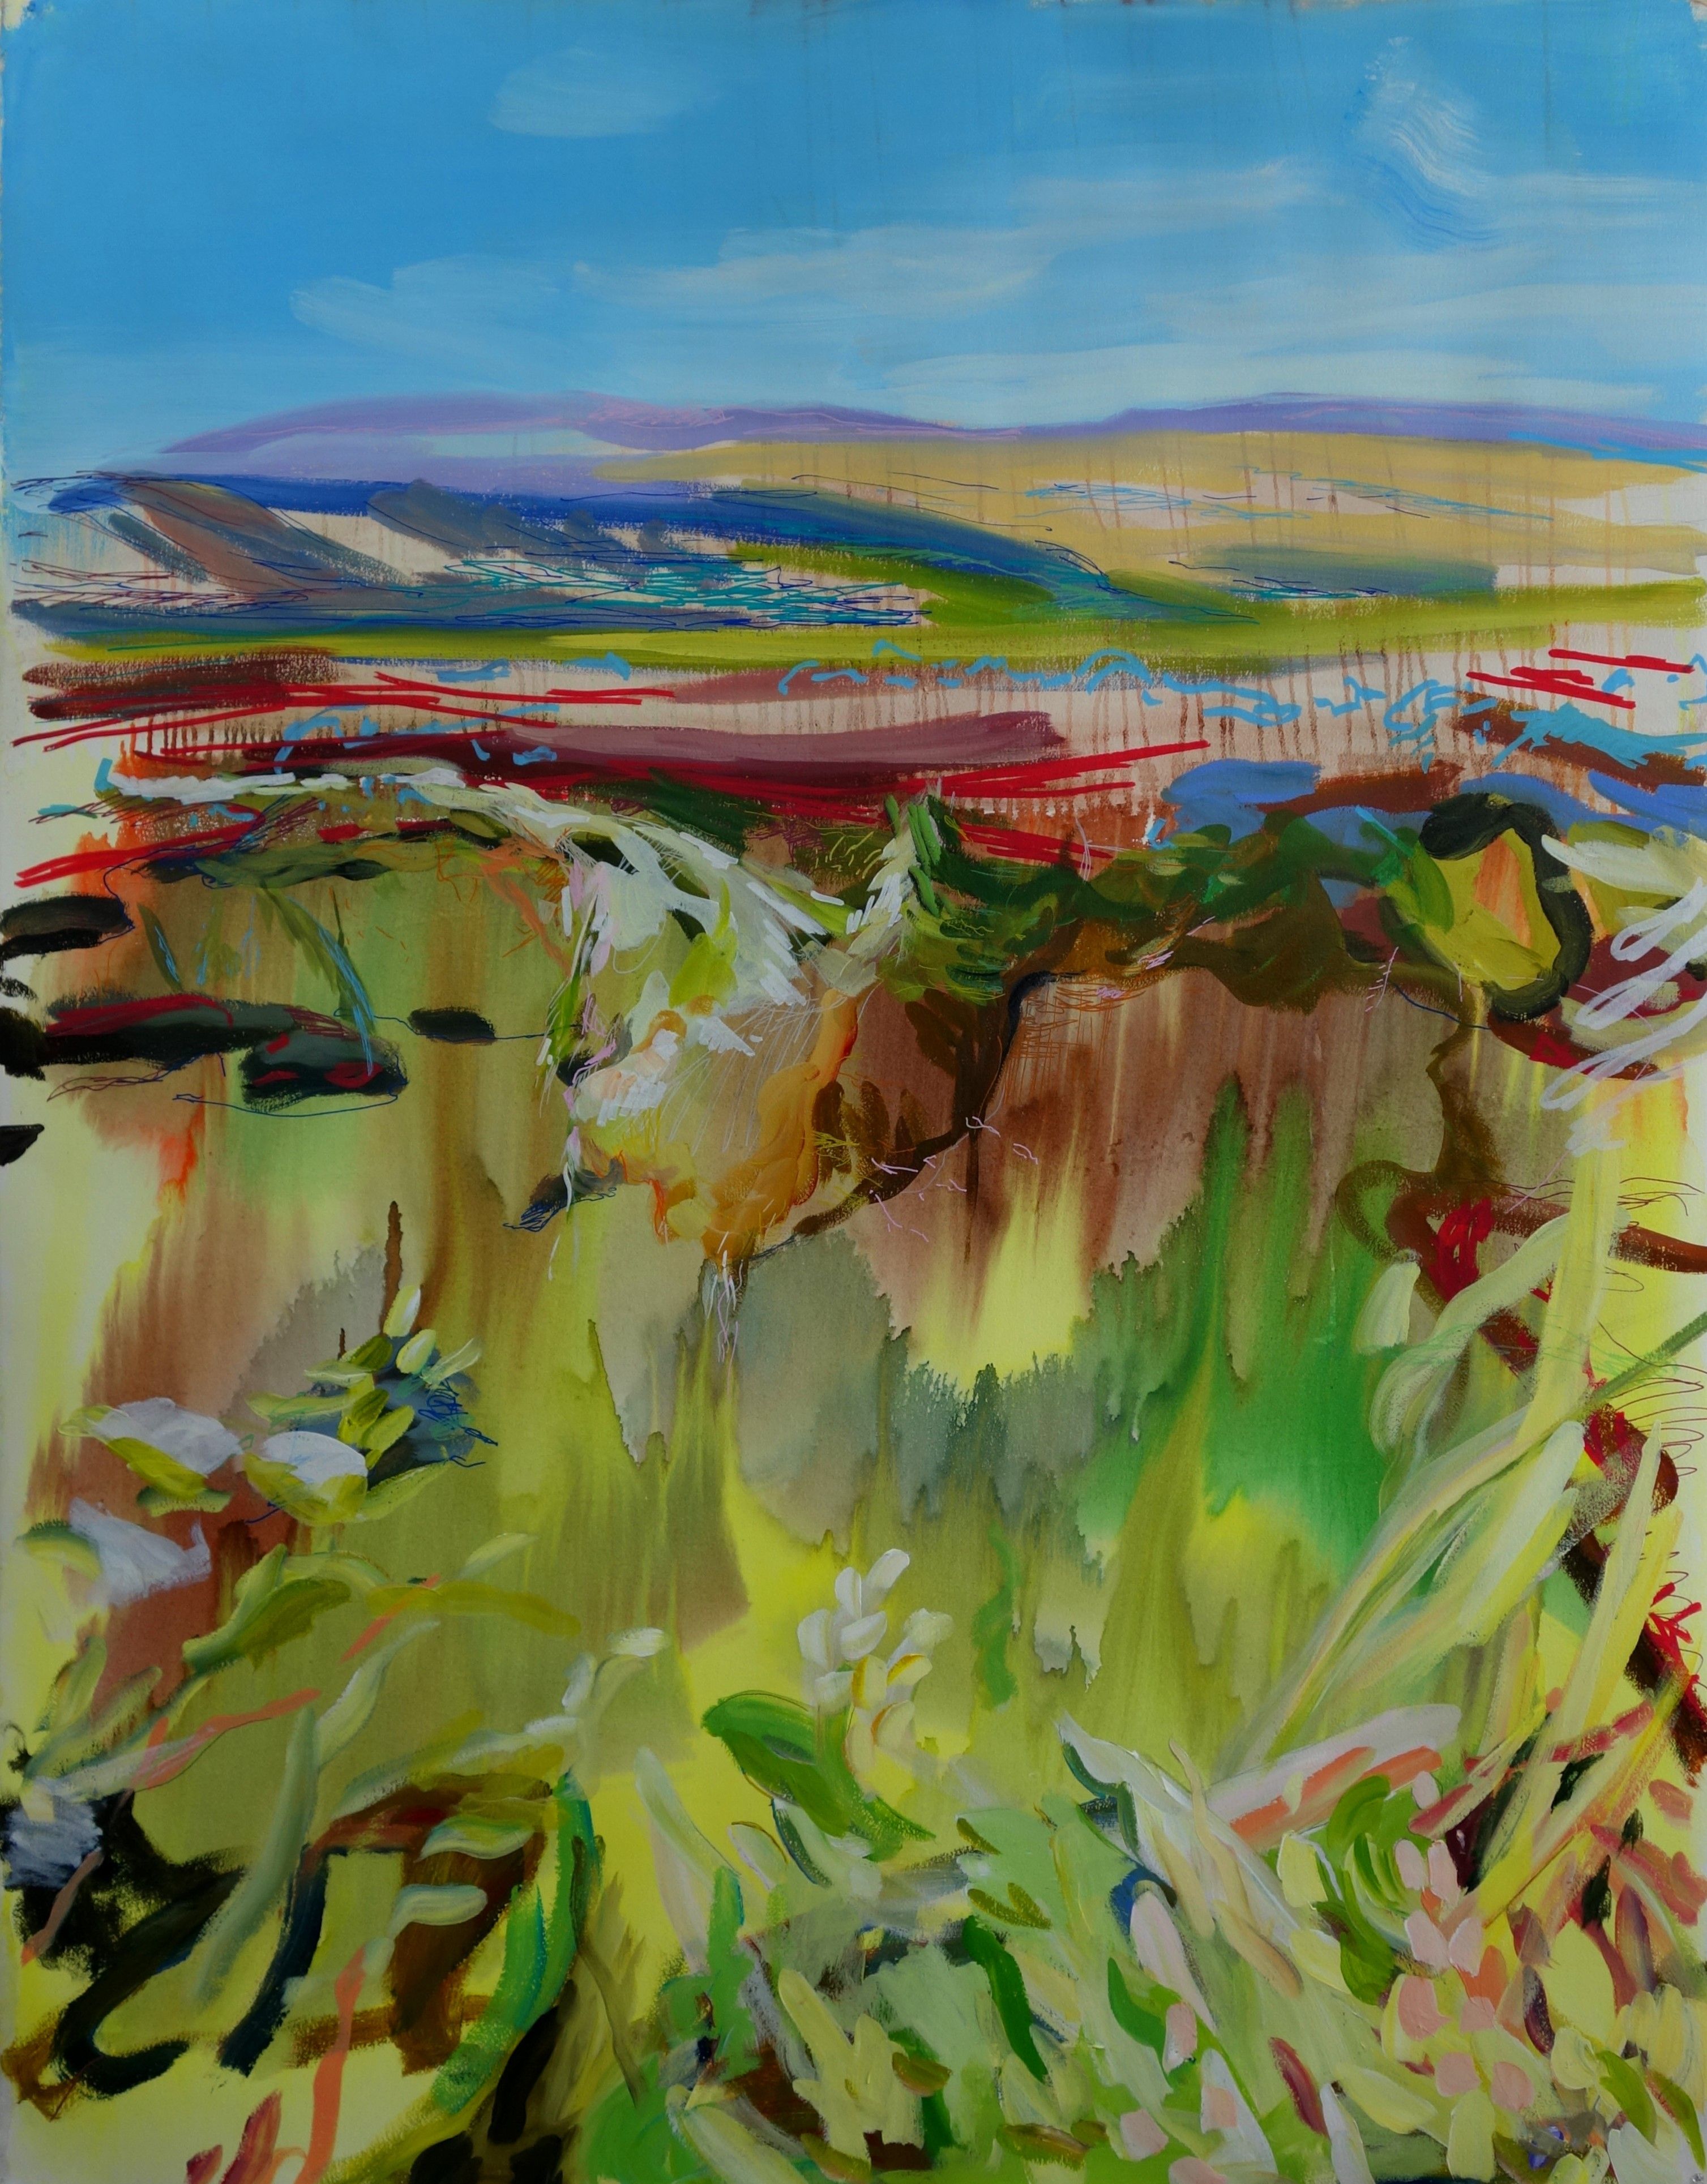 In Nikki Lindt's field sketch "Ghost Forest", vertical lines rise up from a colorful tundra. Photo credit: Nikki Lindt